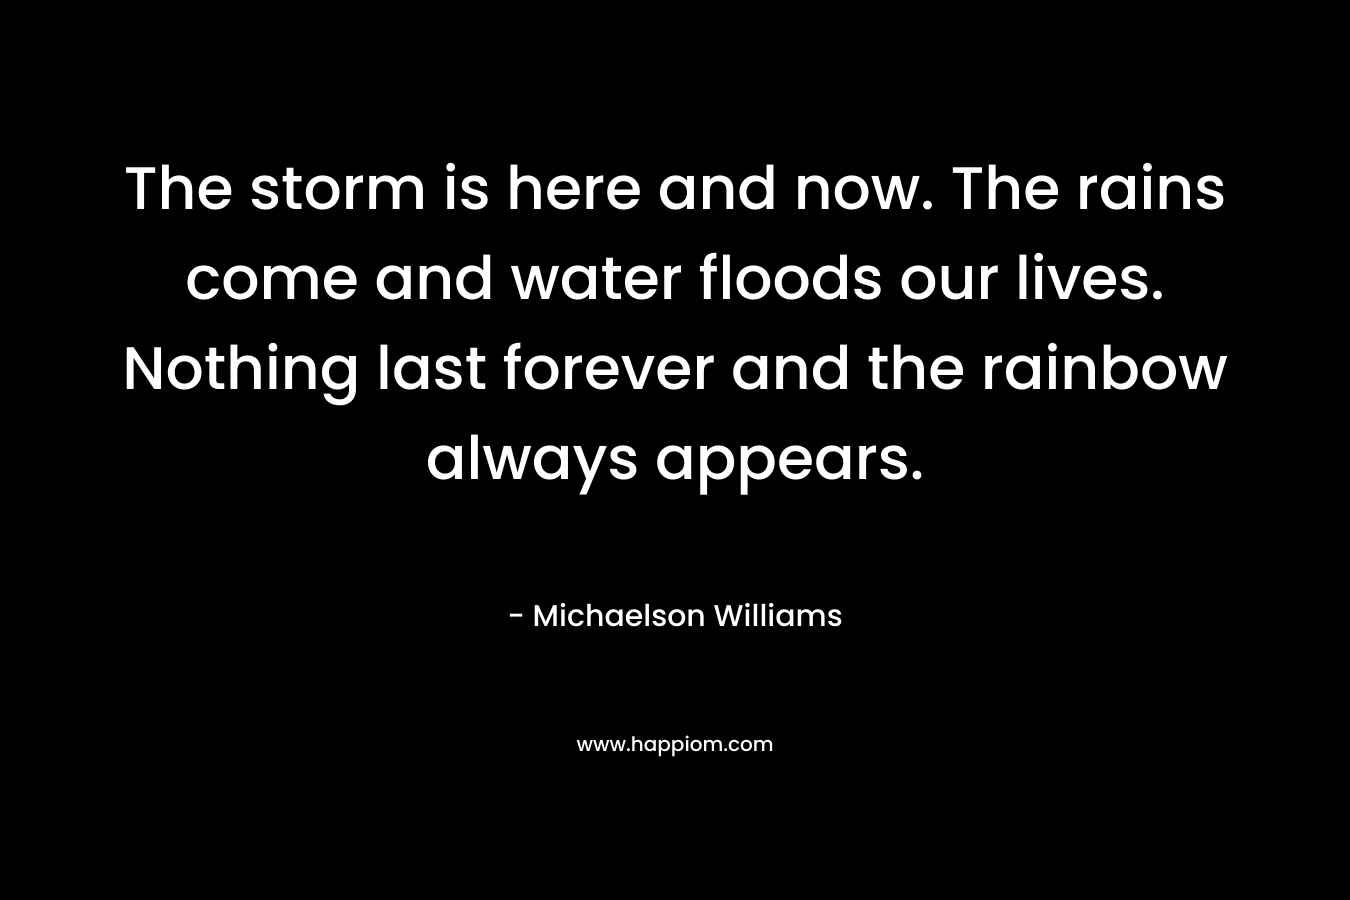 The storm is here and now. The rains come and water floods our lives. Nothing last forever and the rainbow always appears.